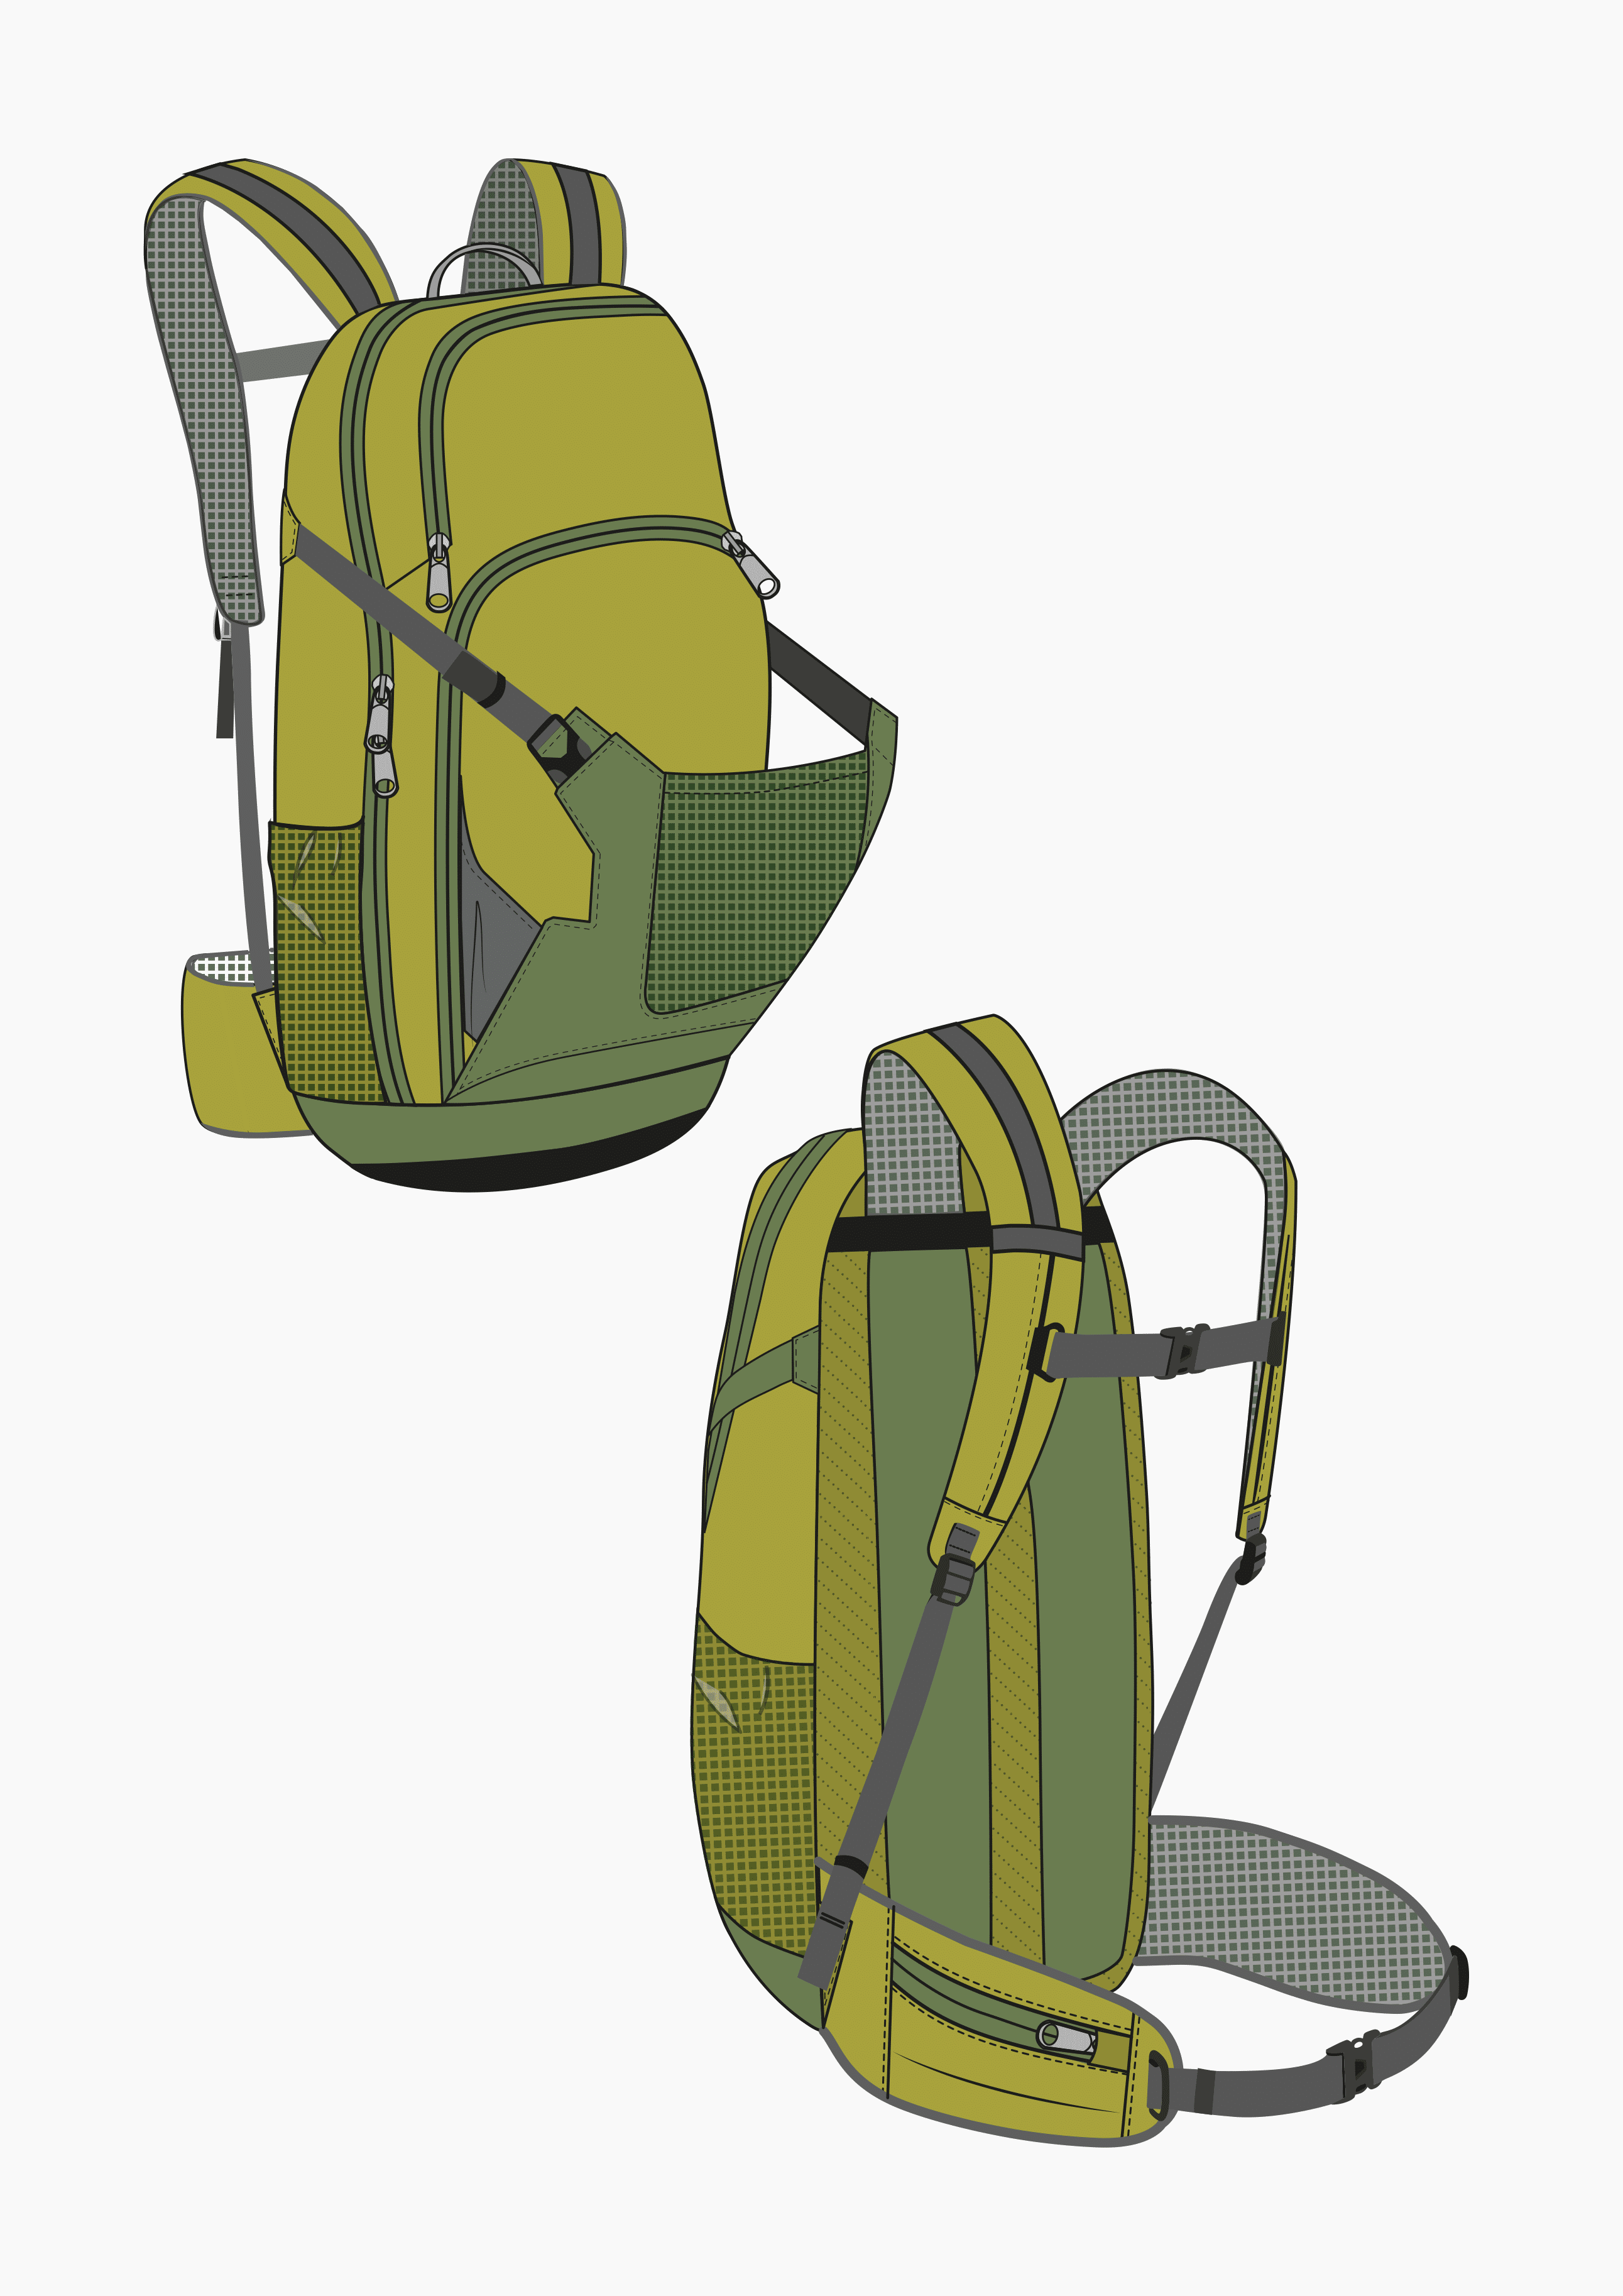 Product: Pattern Making Cycling Backpack